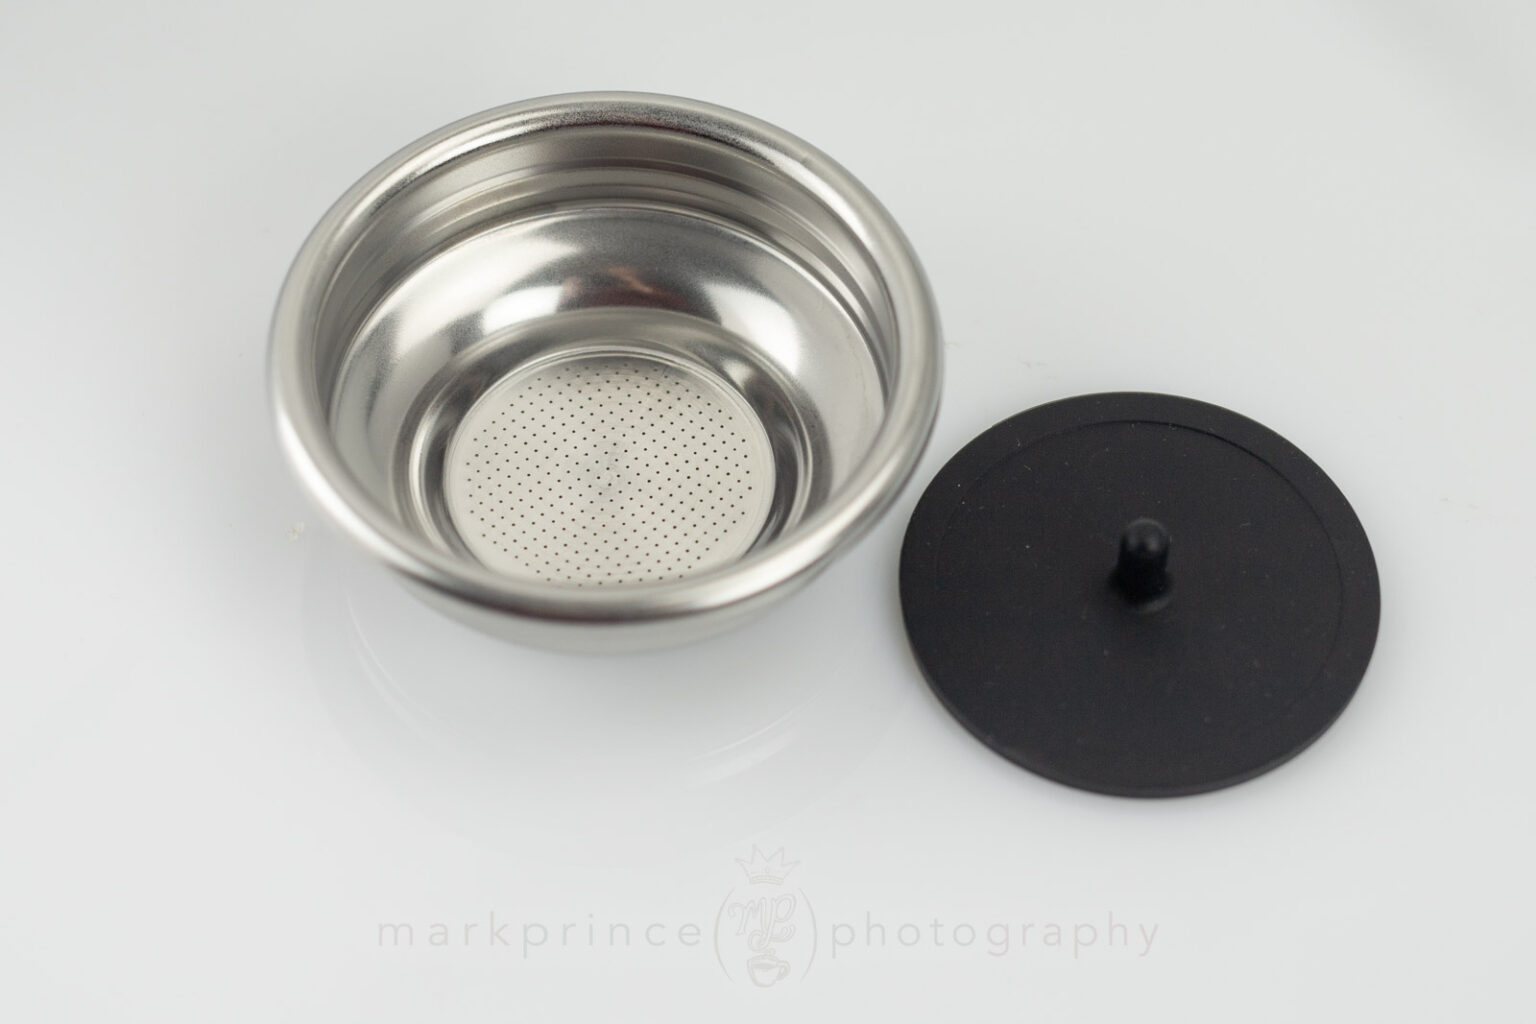 The single basket, and blind filter rubber insert.